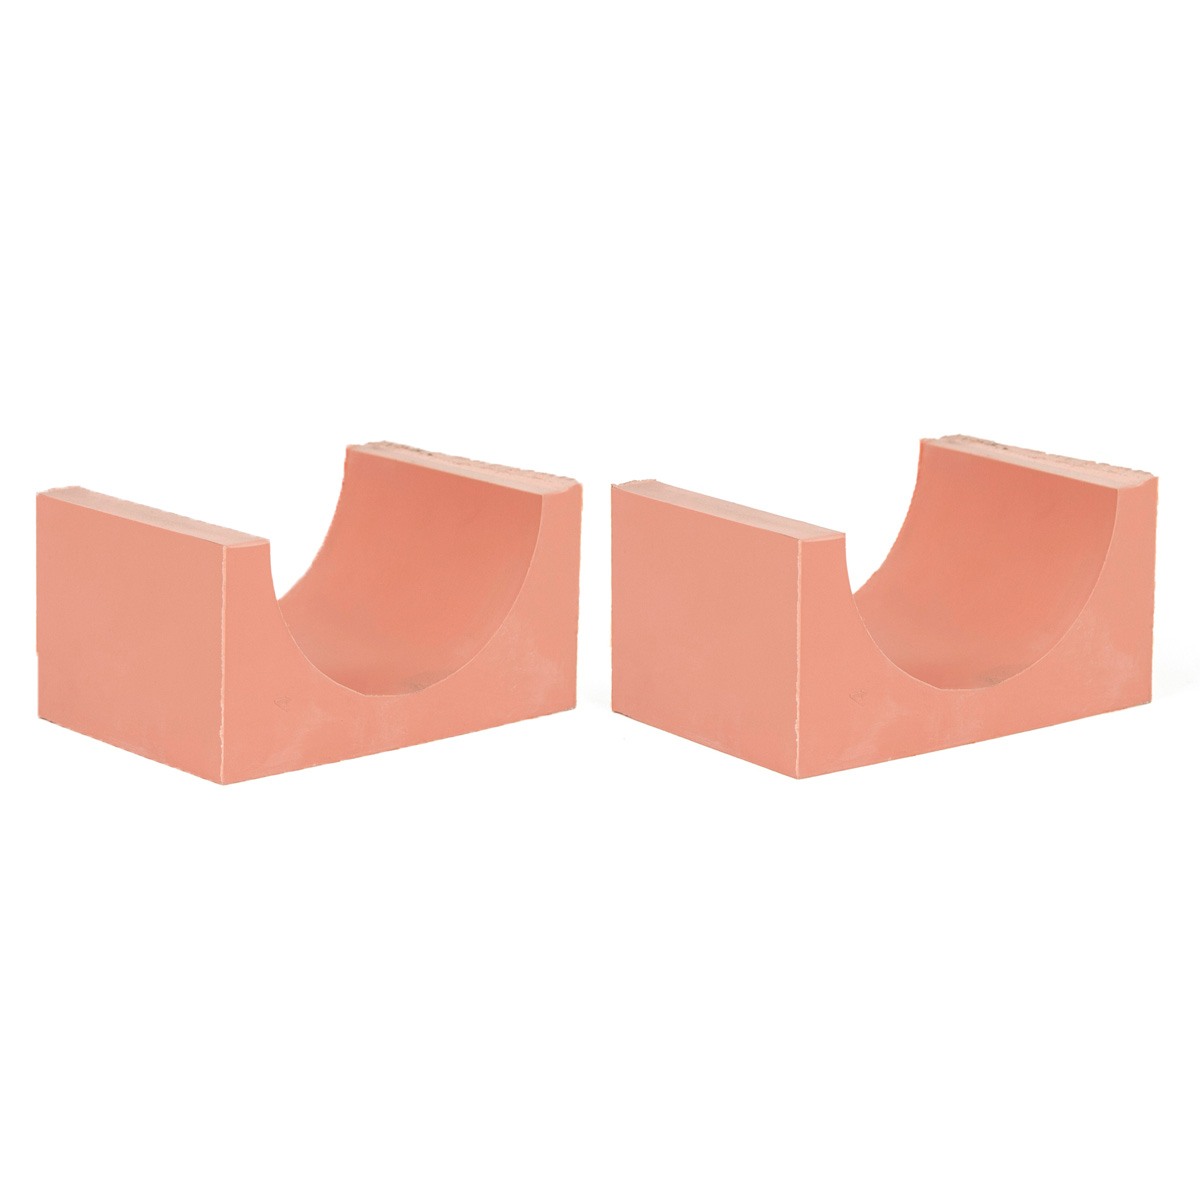 90-70*2 Set of 2 half insert block lycron, 90-70 for cable/pipe diam. 69.5-71.5mm